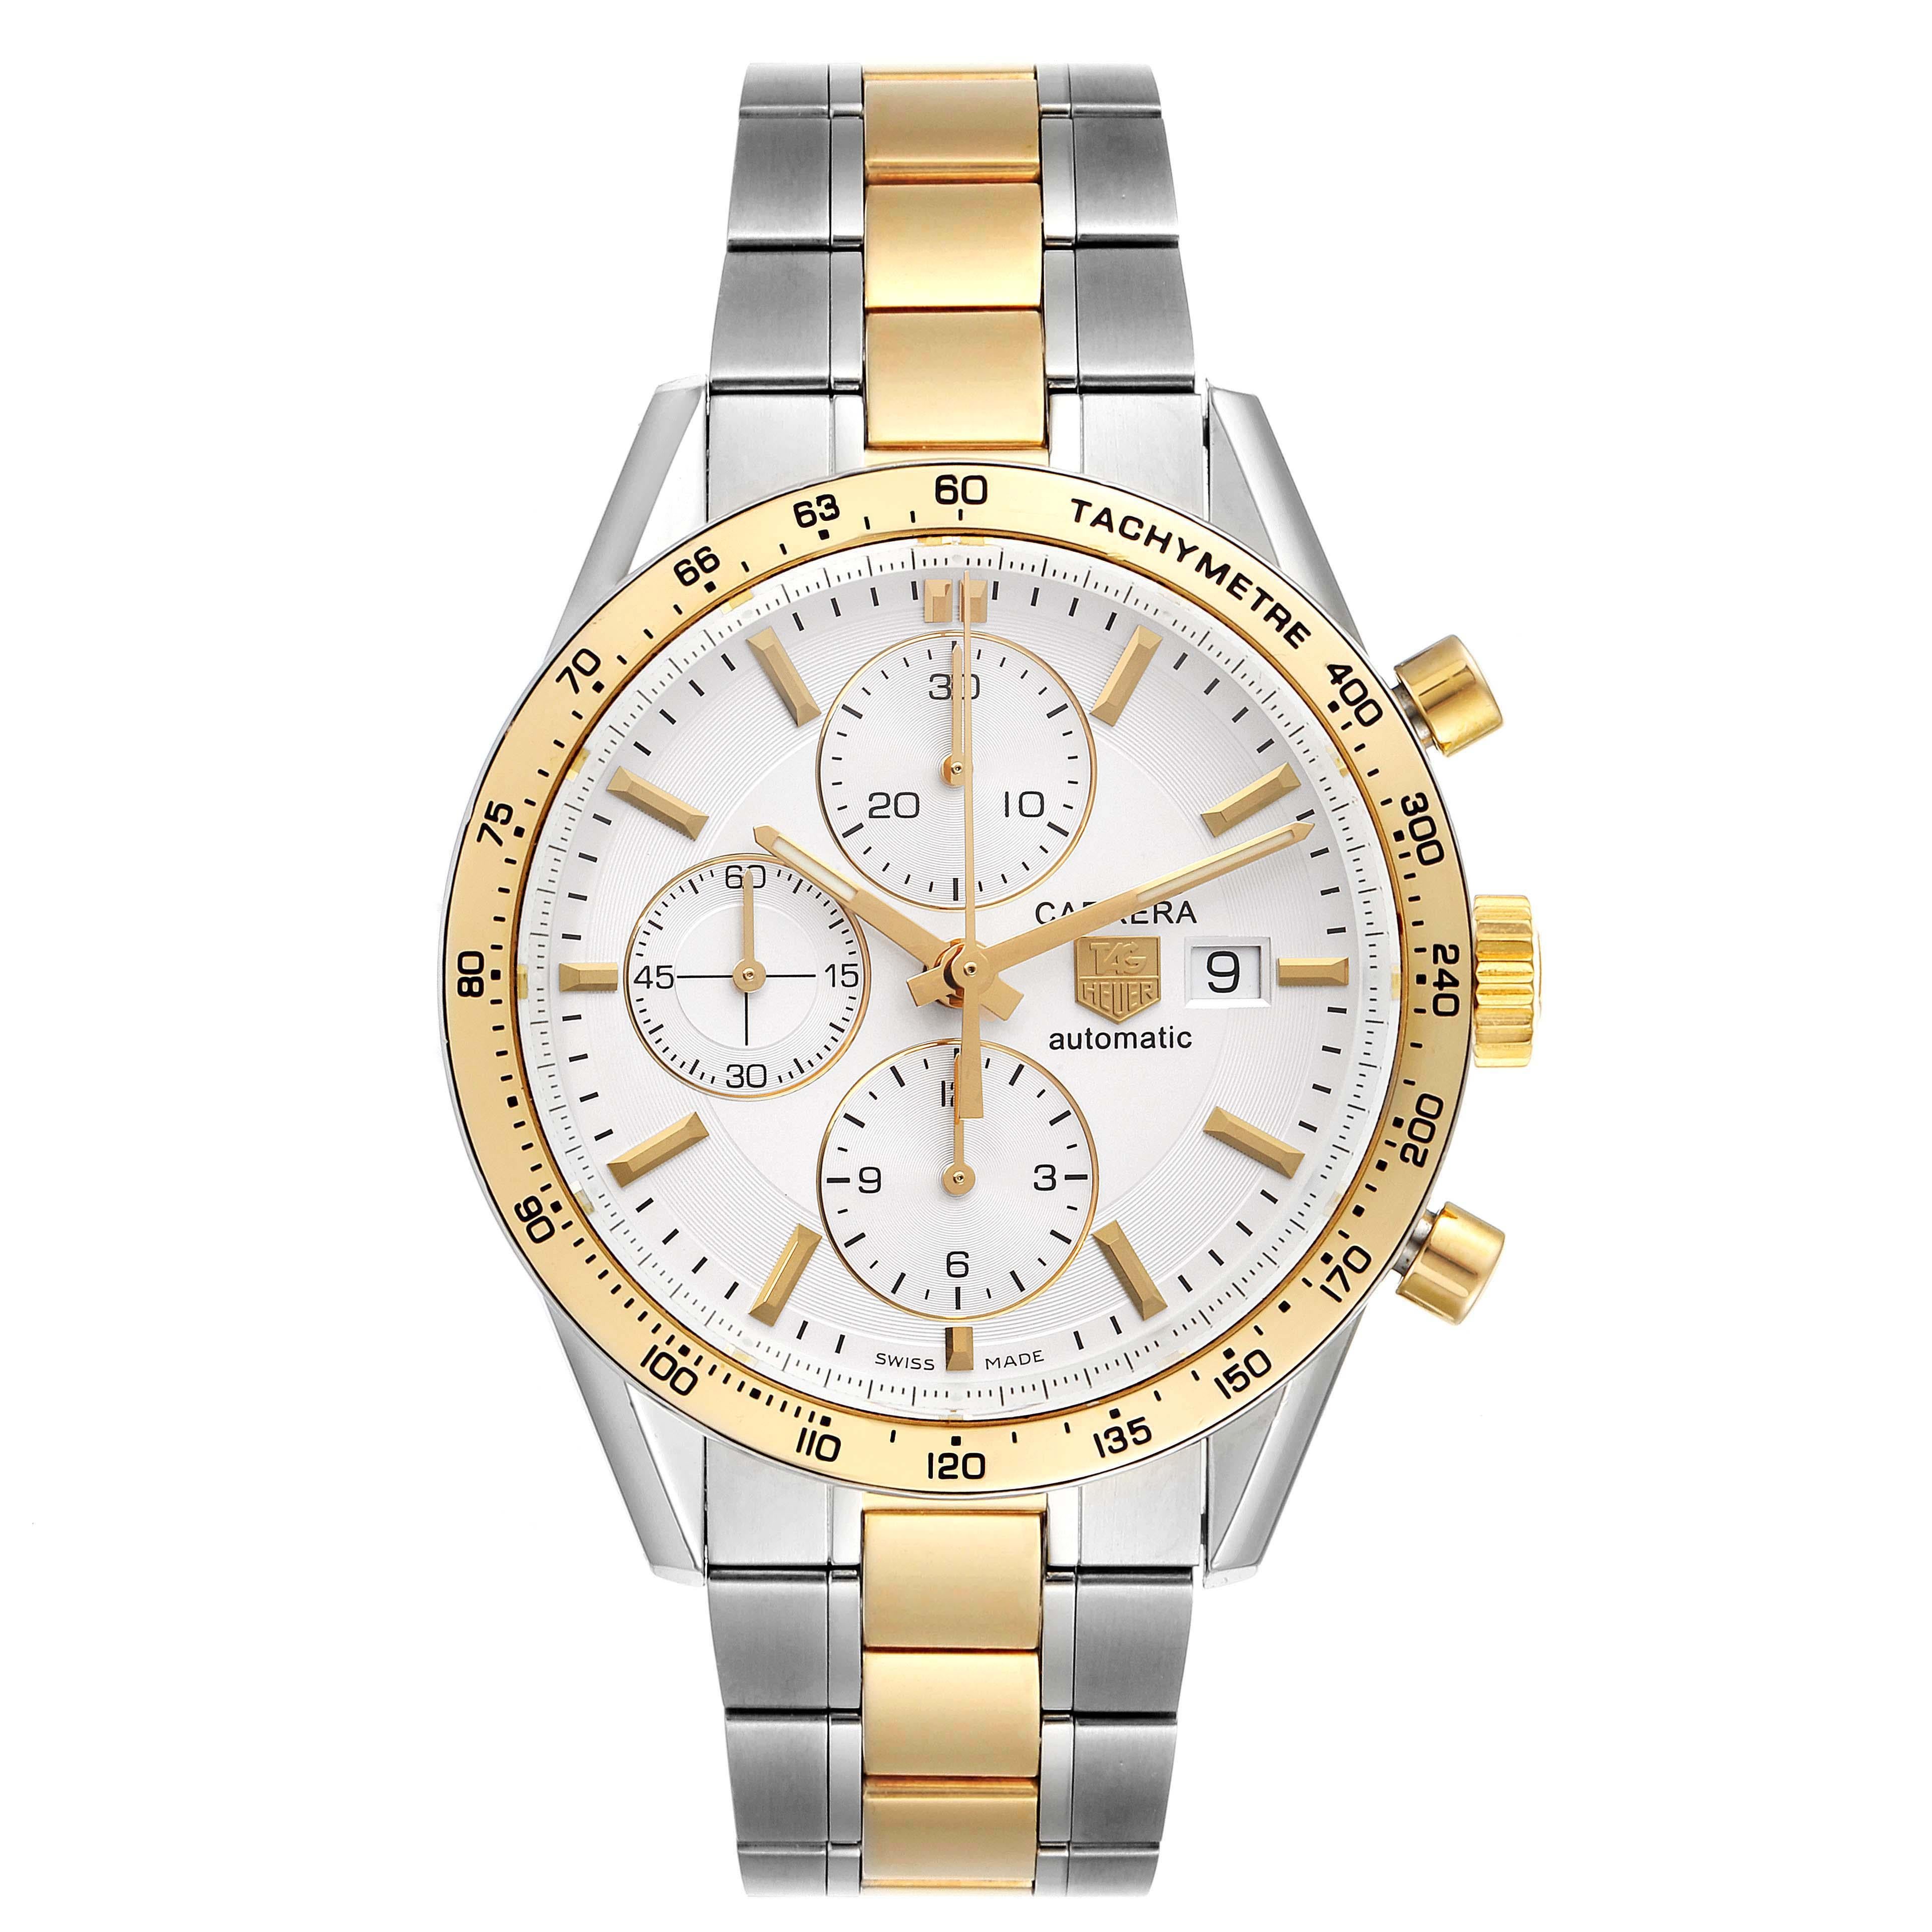 Tag Heuer Carrera Steel Yellow Gold Chronograph Mens Watch CV2050 Box Card. Automatic self-winding movement. Polished stainless steel case 41.0 mm with yellow gold chronograph pushers and a crown. Yellow gold bezel with tachymeter scale. Scratch